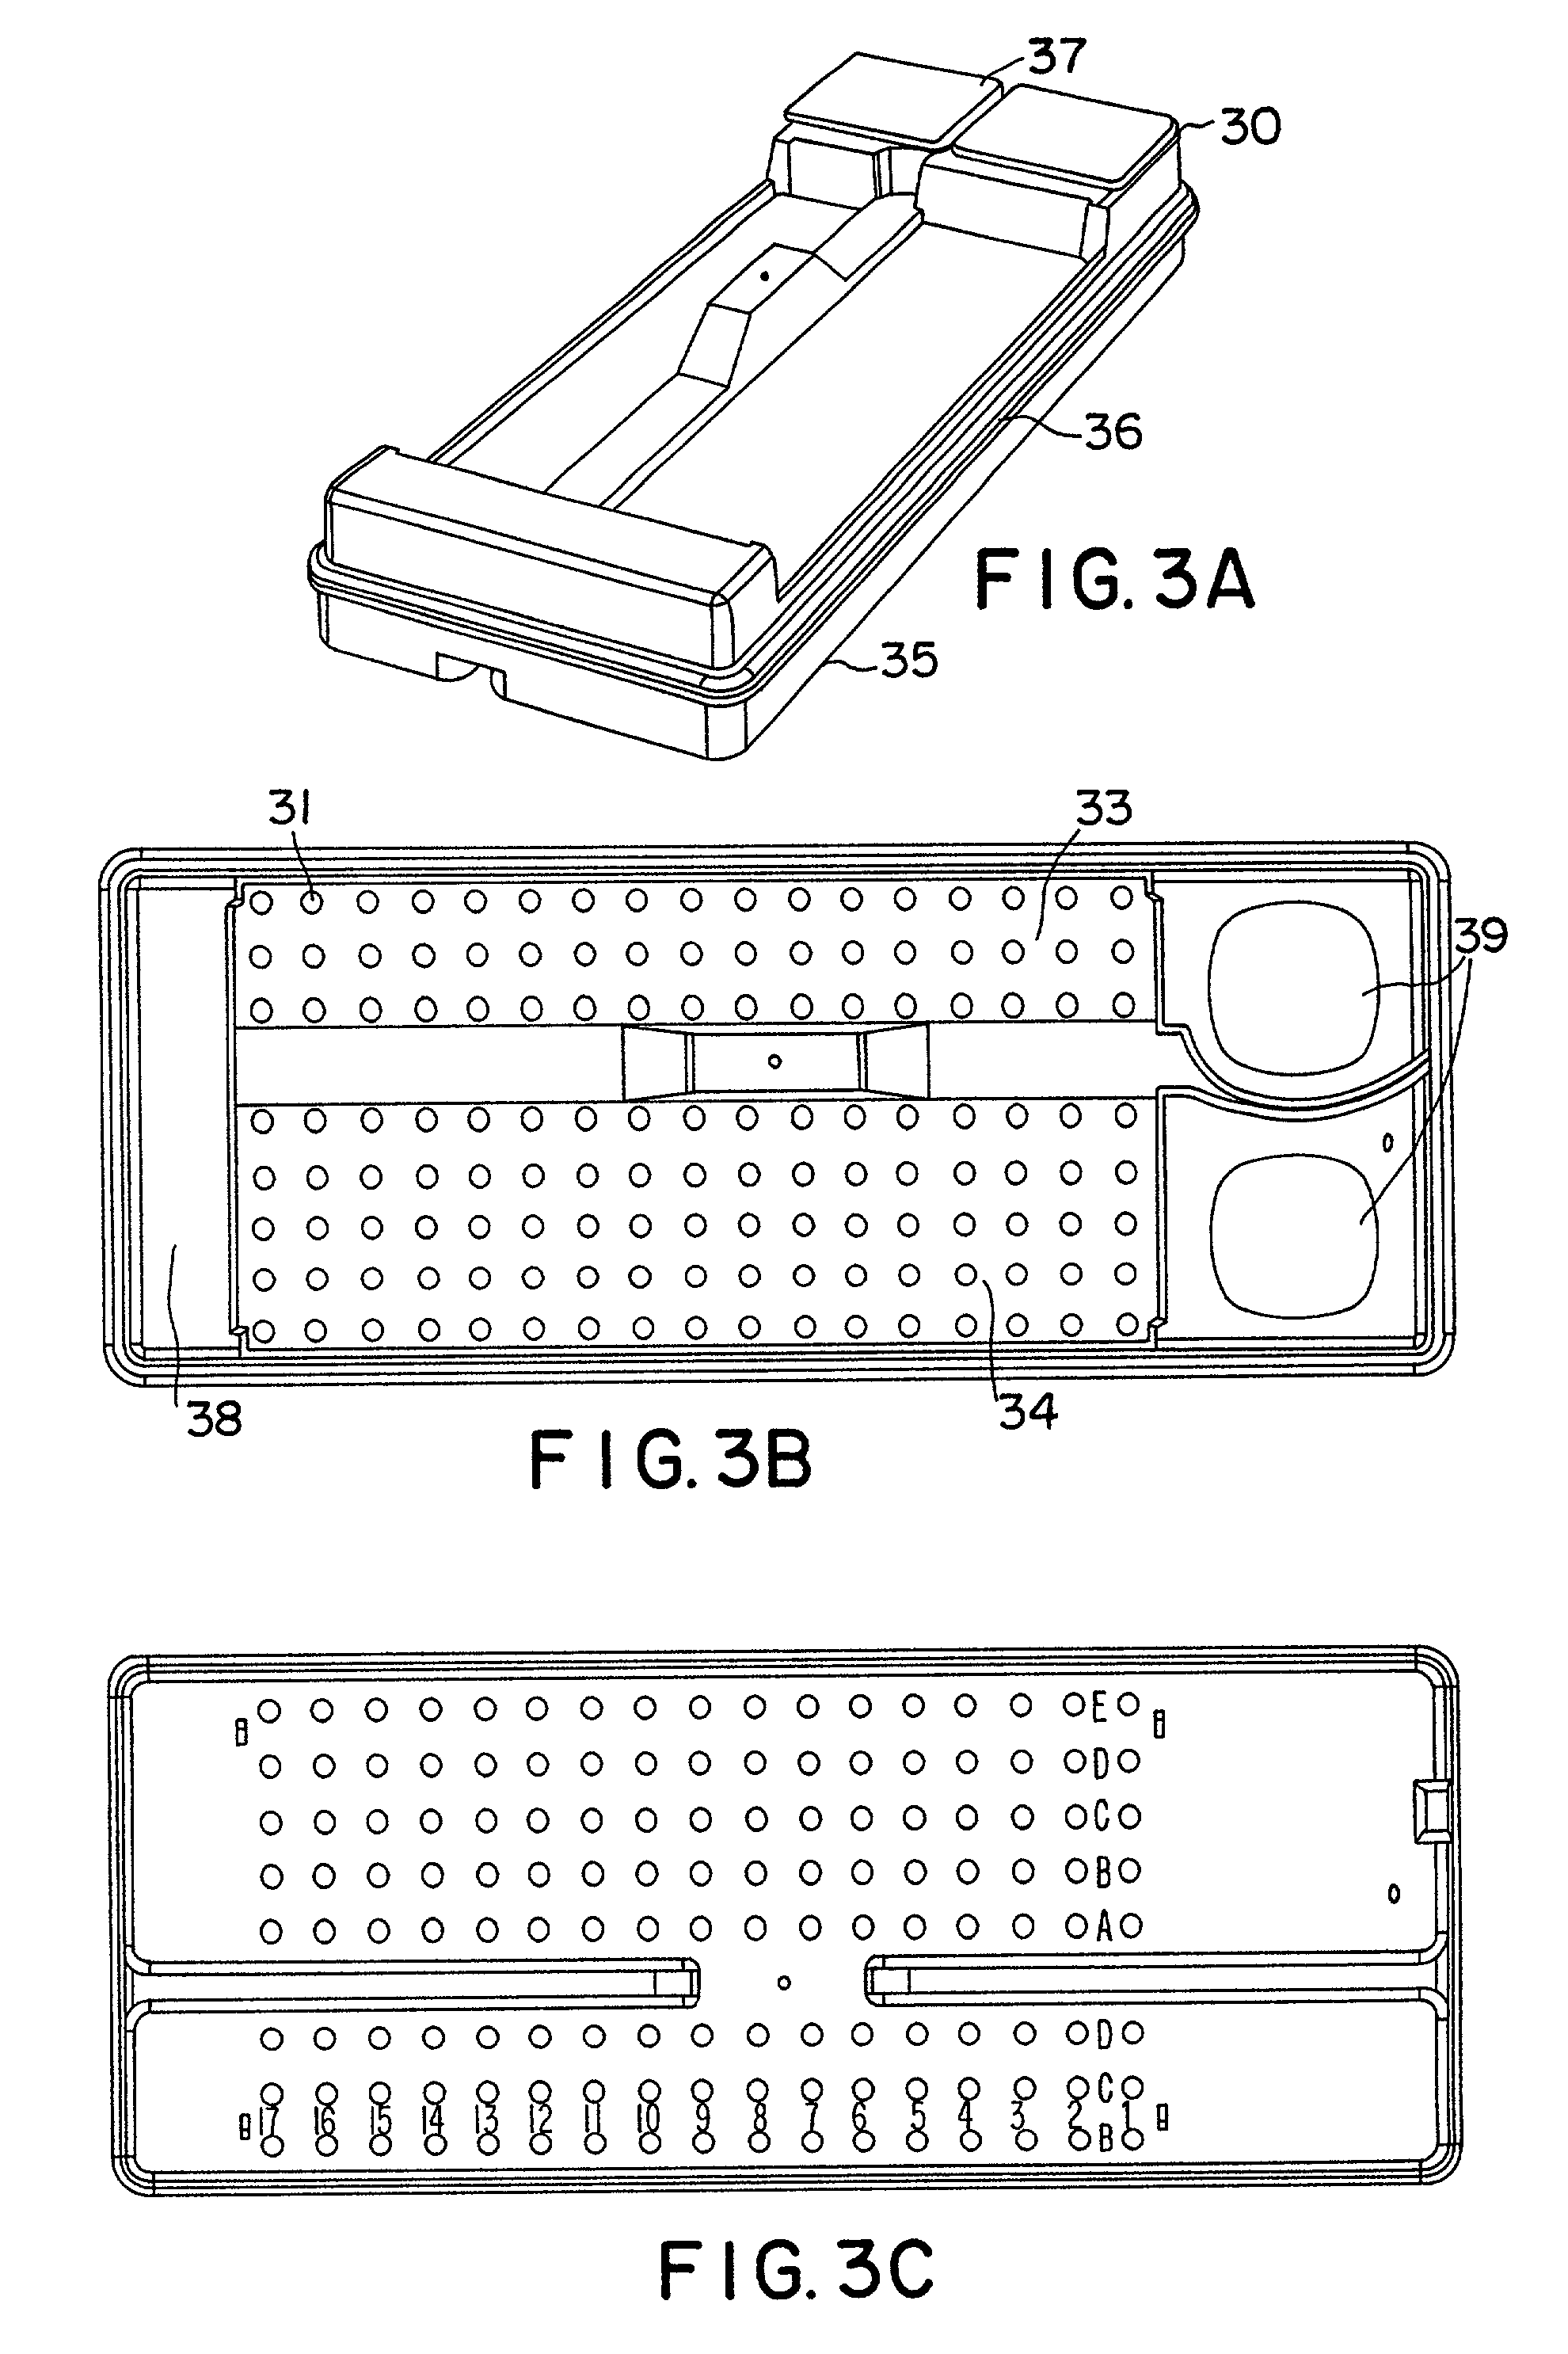 Automated microbiological testing apparatus and method therefor